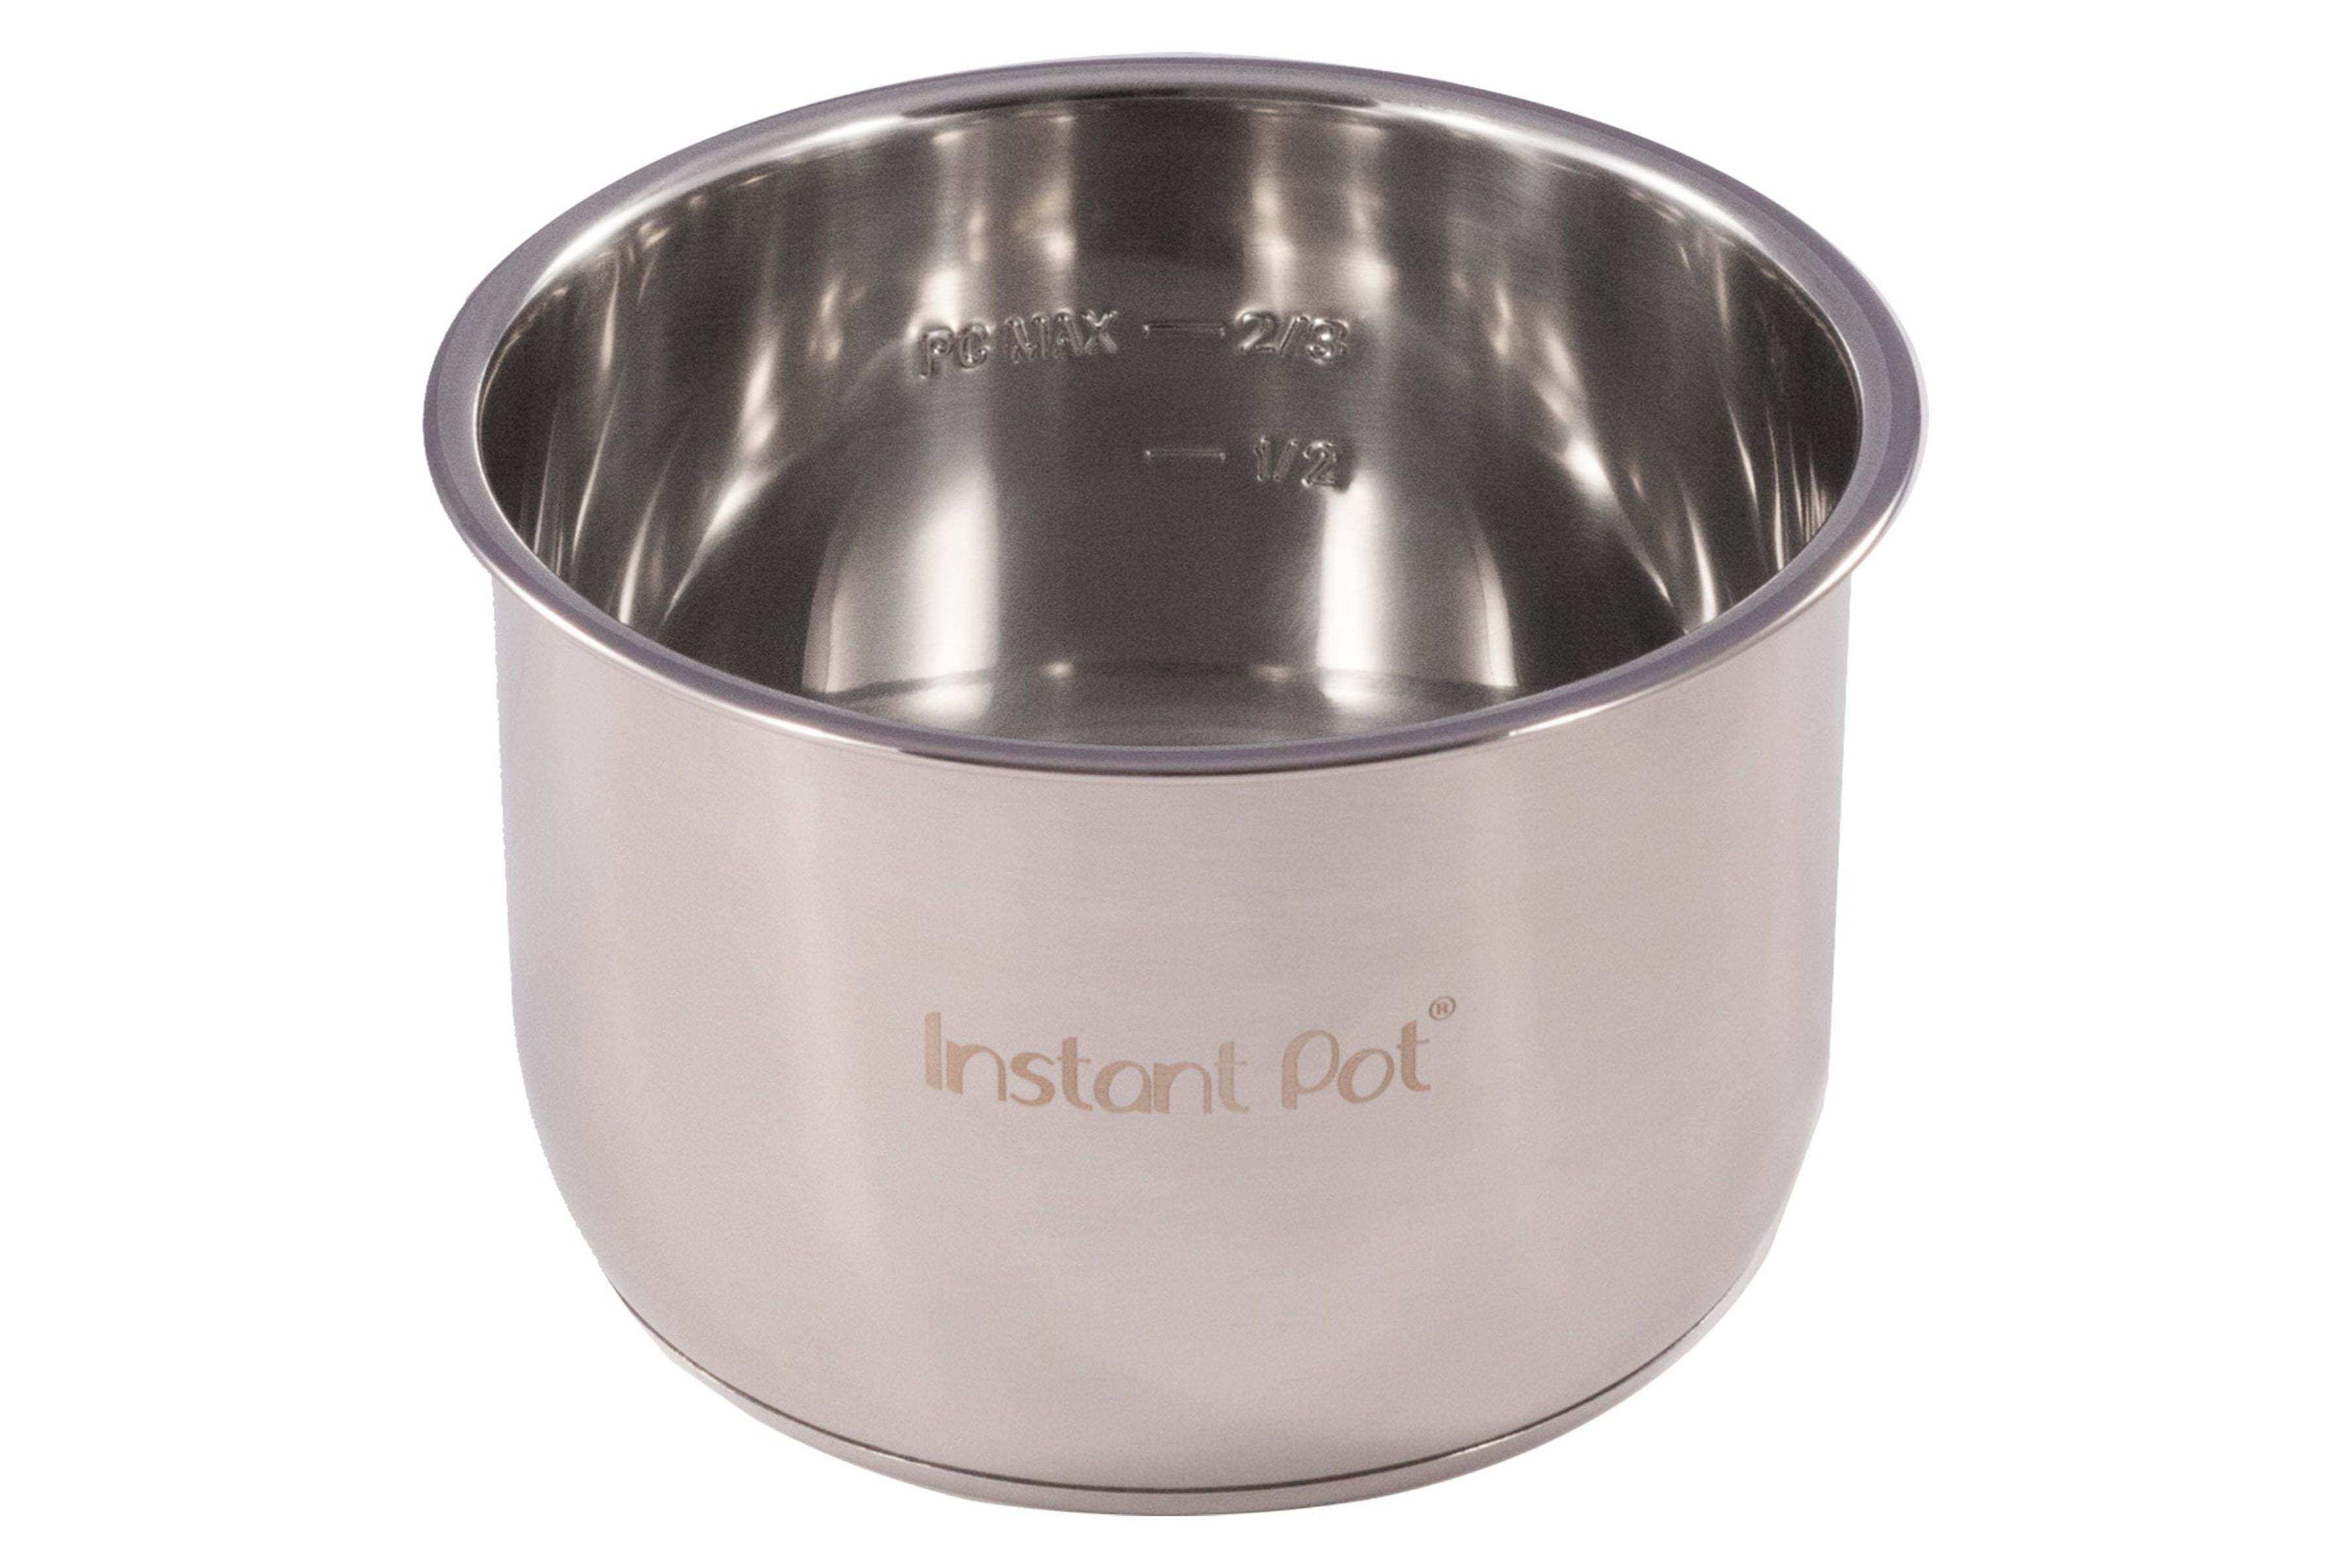  Instant Pot Stainless Steel Inner Cooking Pot Mini 3